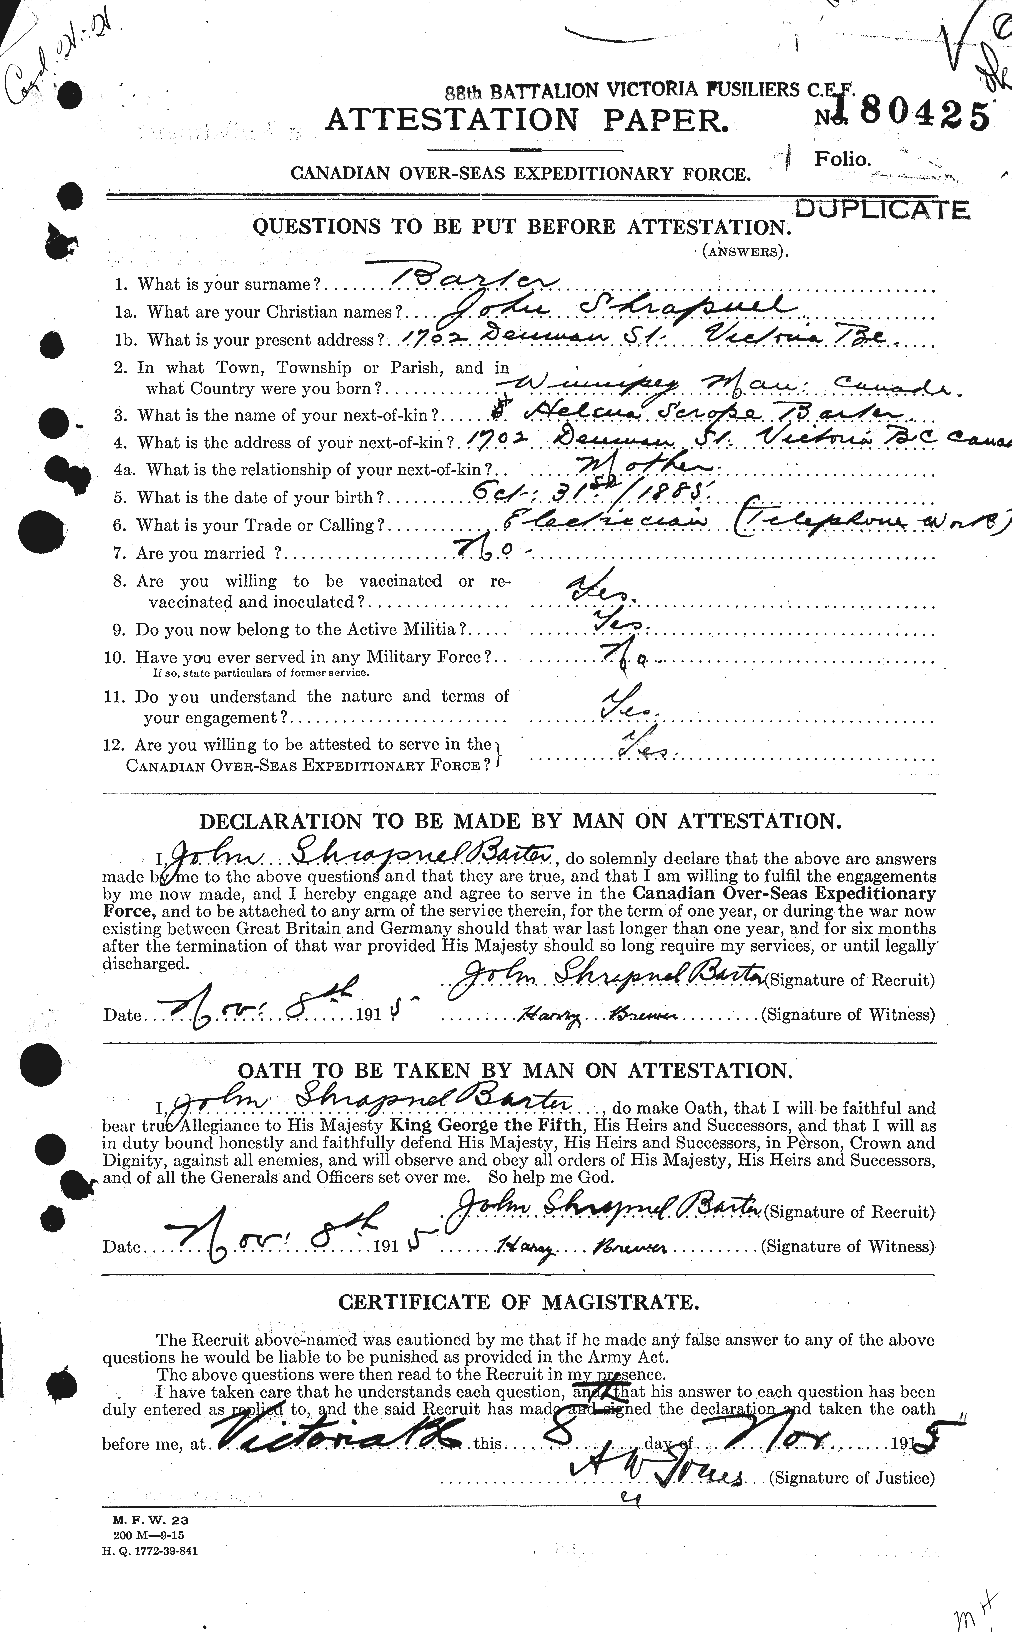 Personnel Records of the First World War - CEF 229045a